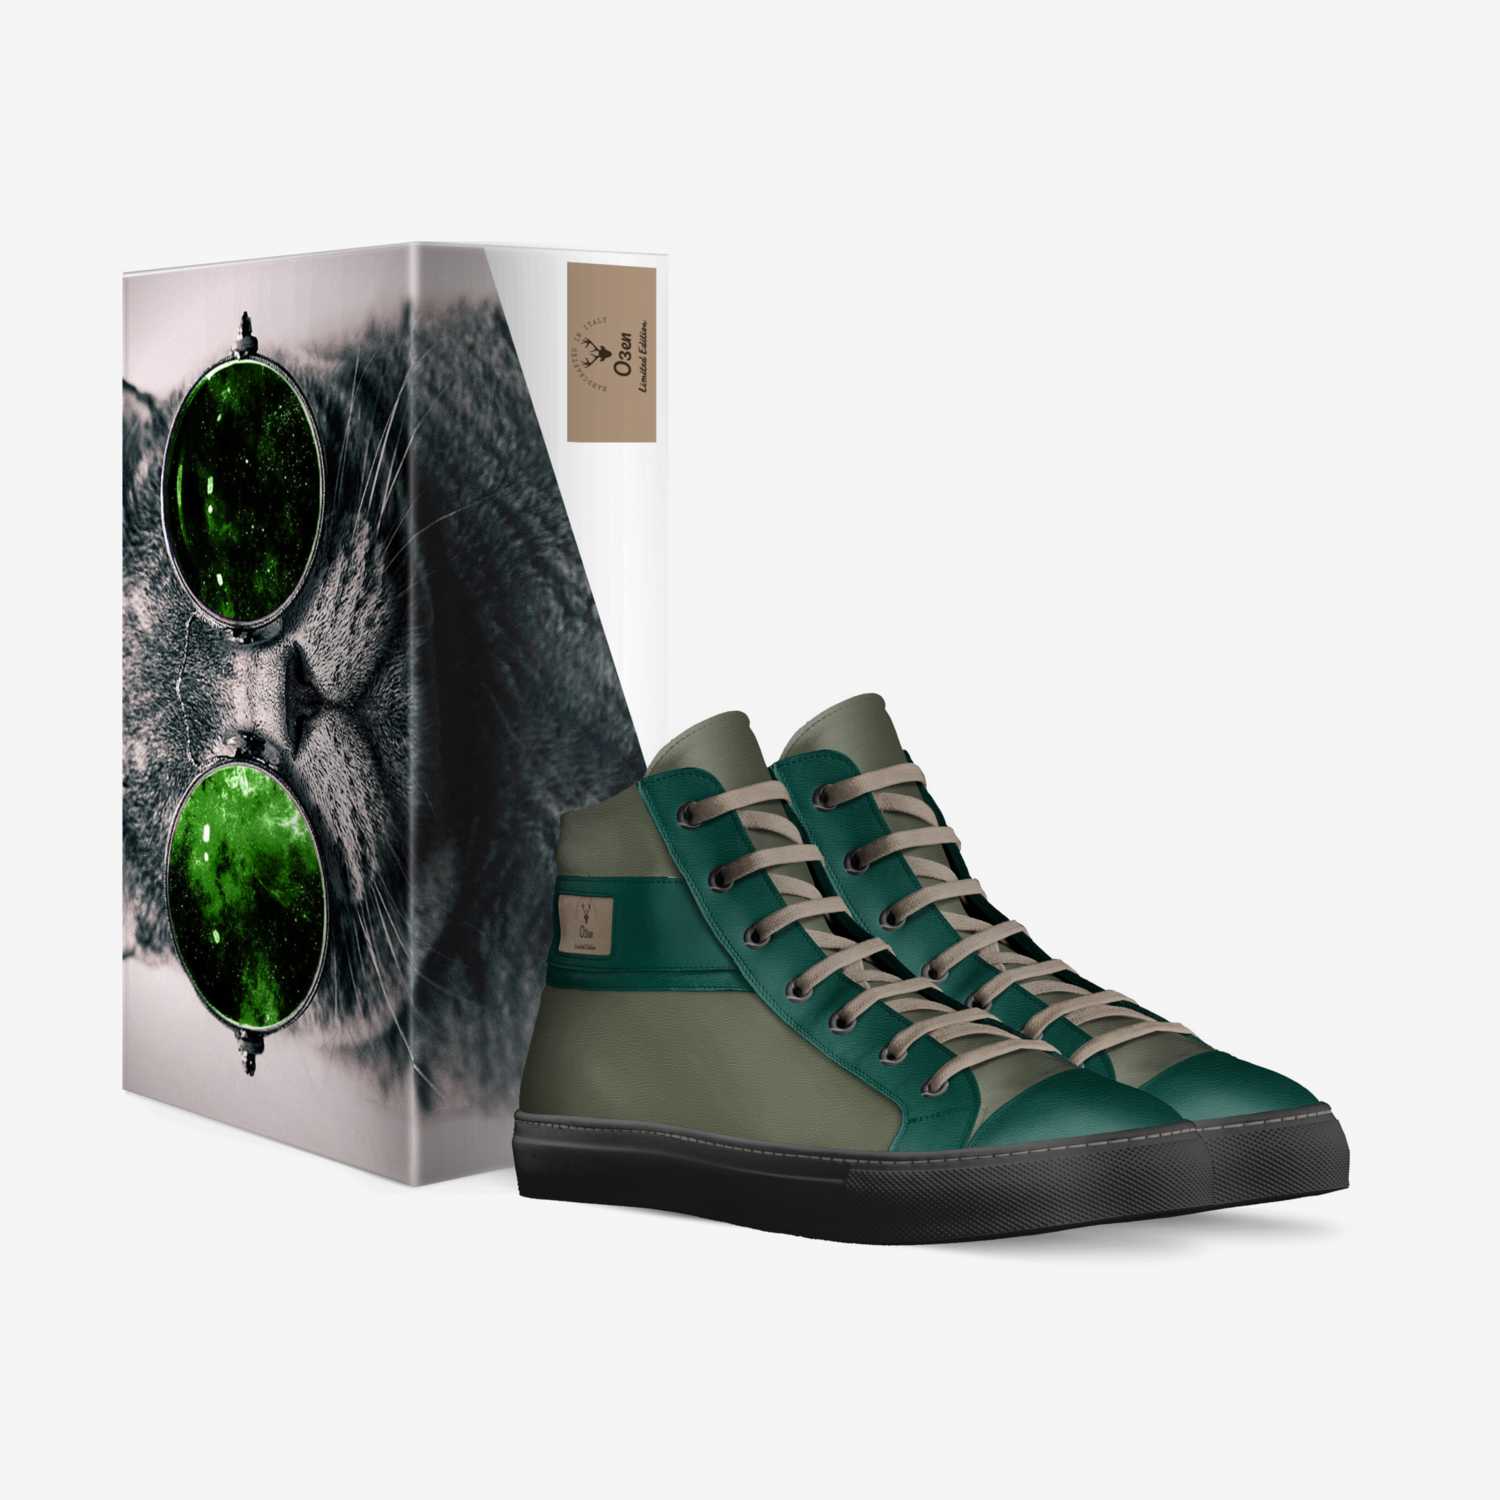 O3en custom made in Italy shoes by Joash Worrel | Box view